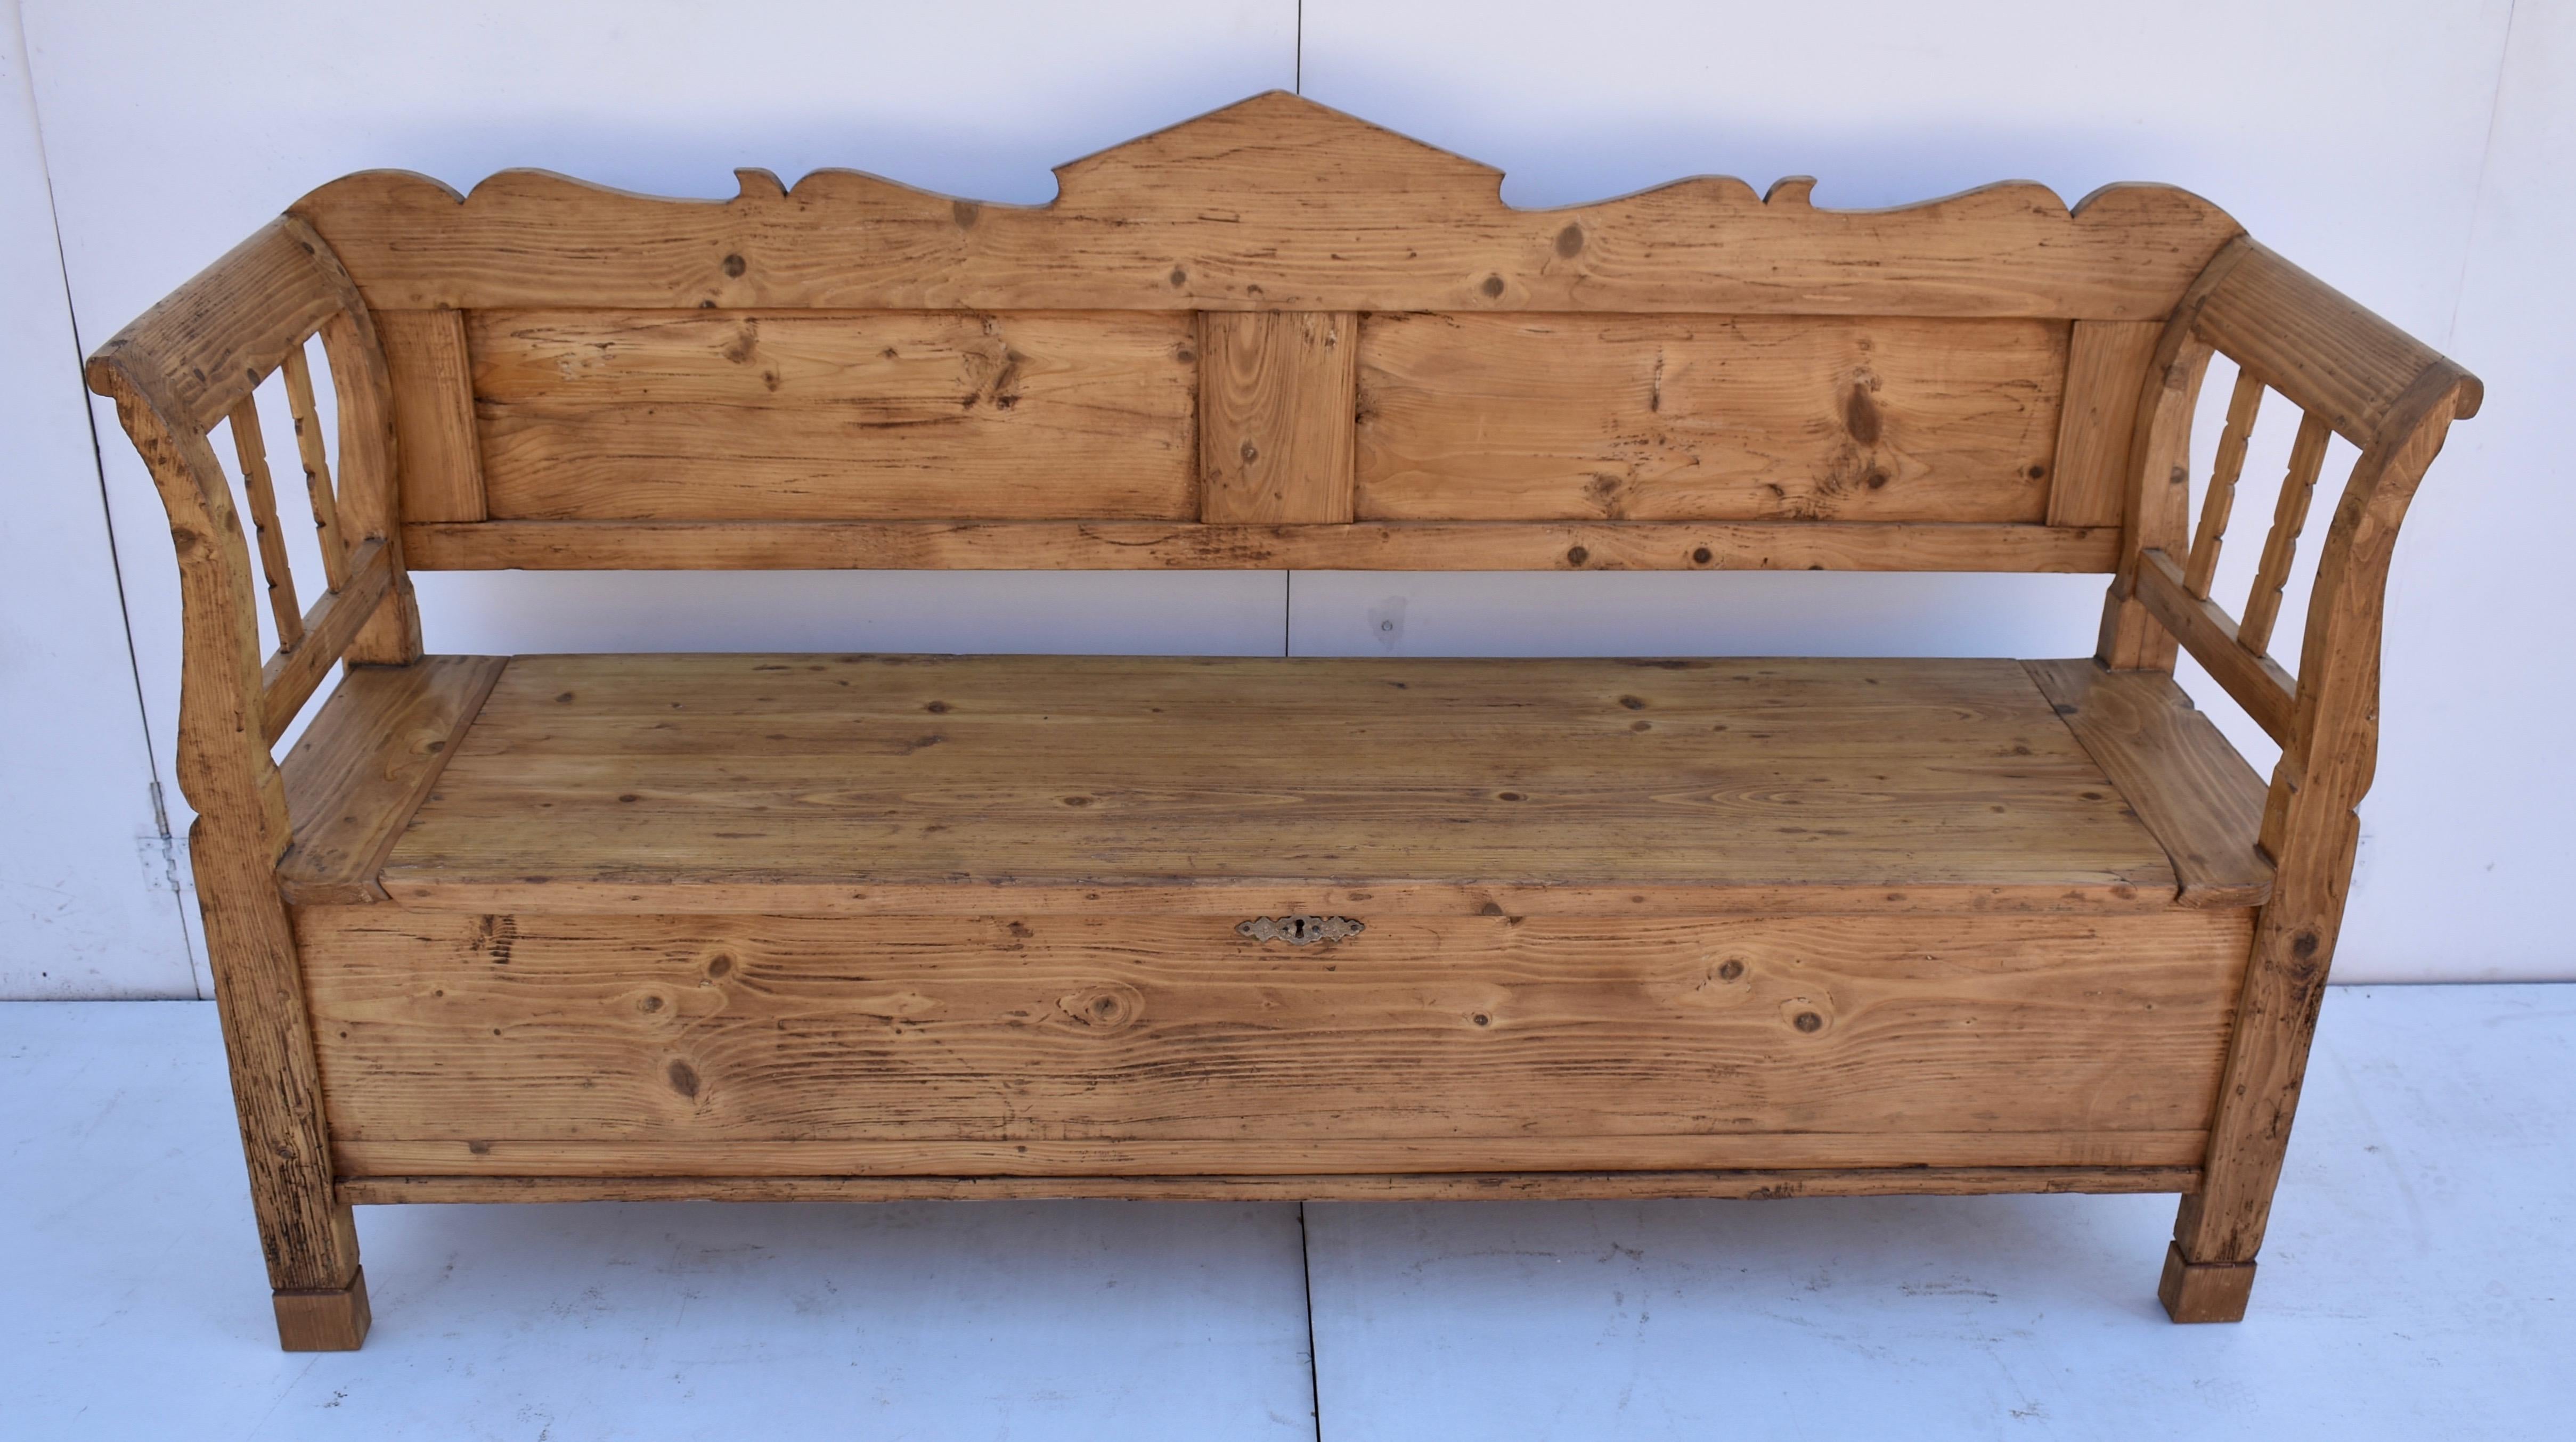 This handsome pine Storage Bench features a scalloped top rail above two flat panels. The scrolled arms enclose two notched splats on each side. The seat, braced with cross members on the underside, lifts to reveal a deep storage well,